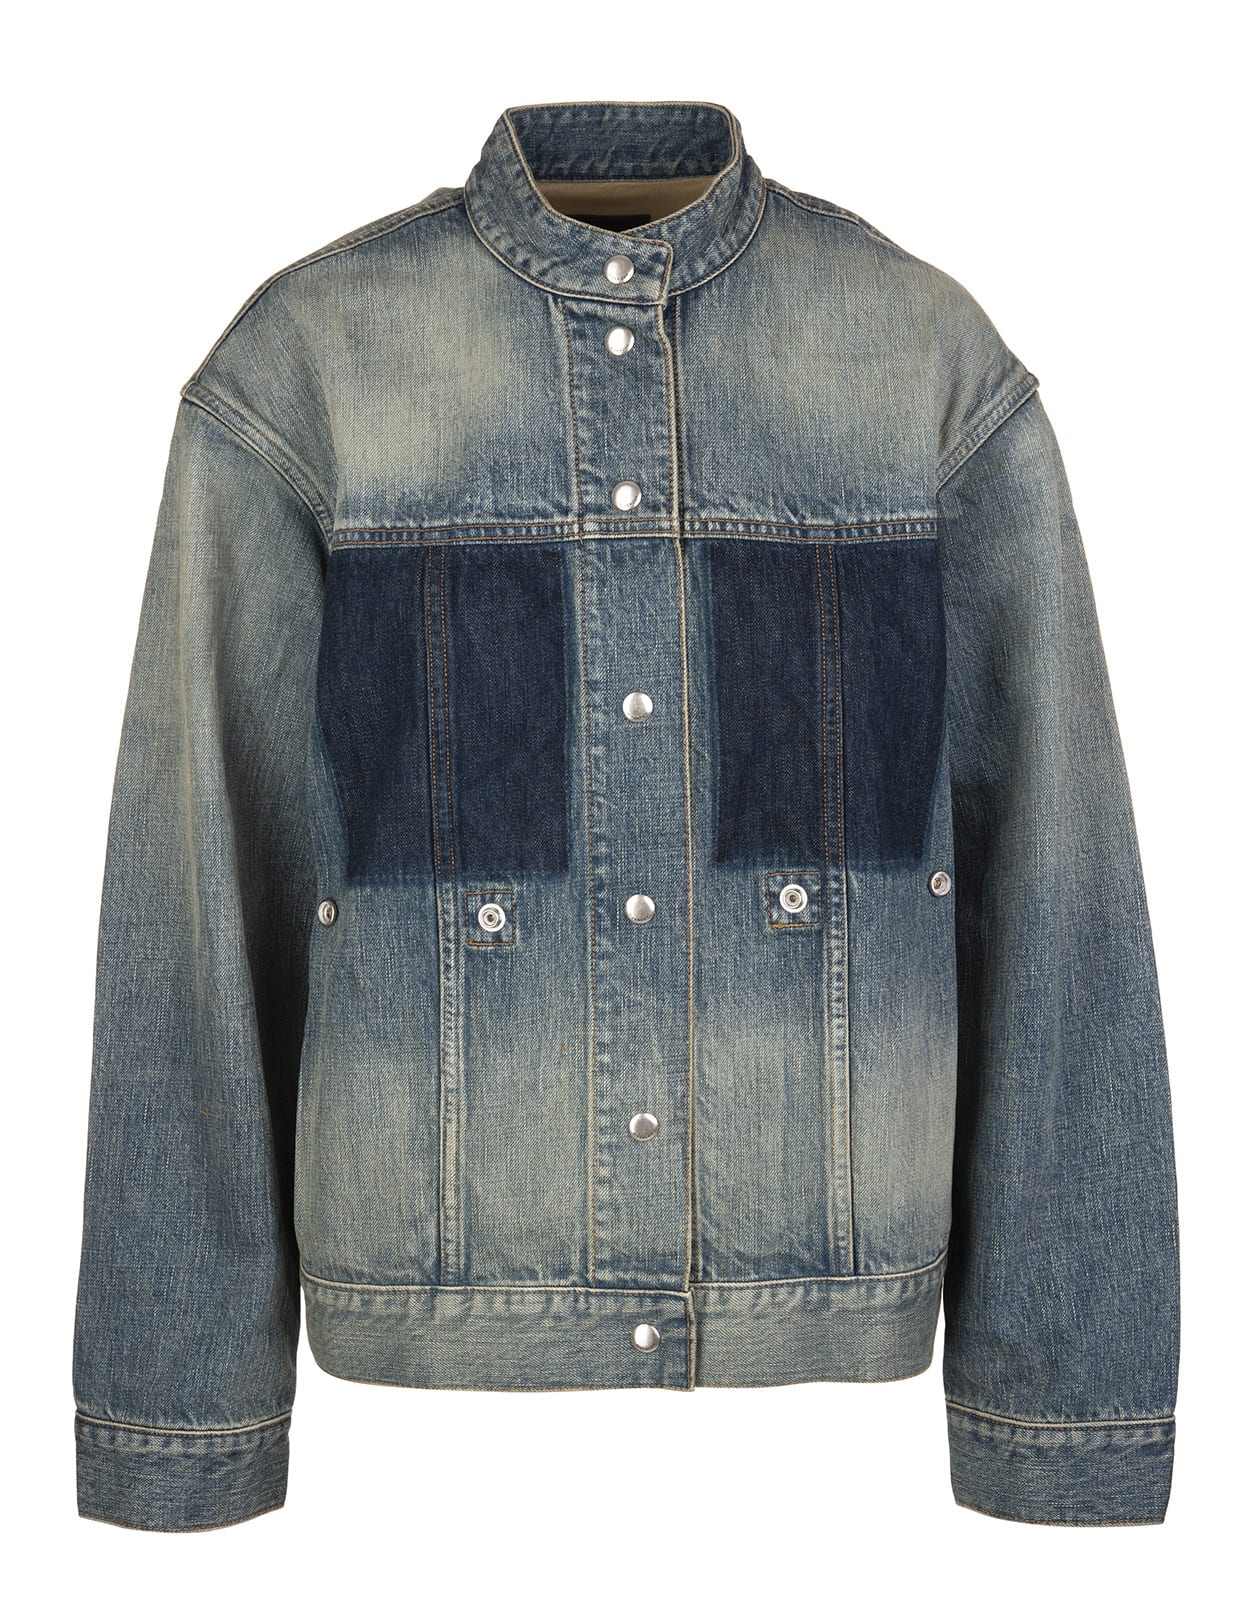 Givenchy Woman Light Denim Jacket With Side Buttons For Structured Cut